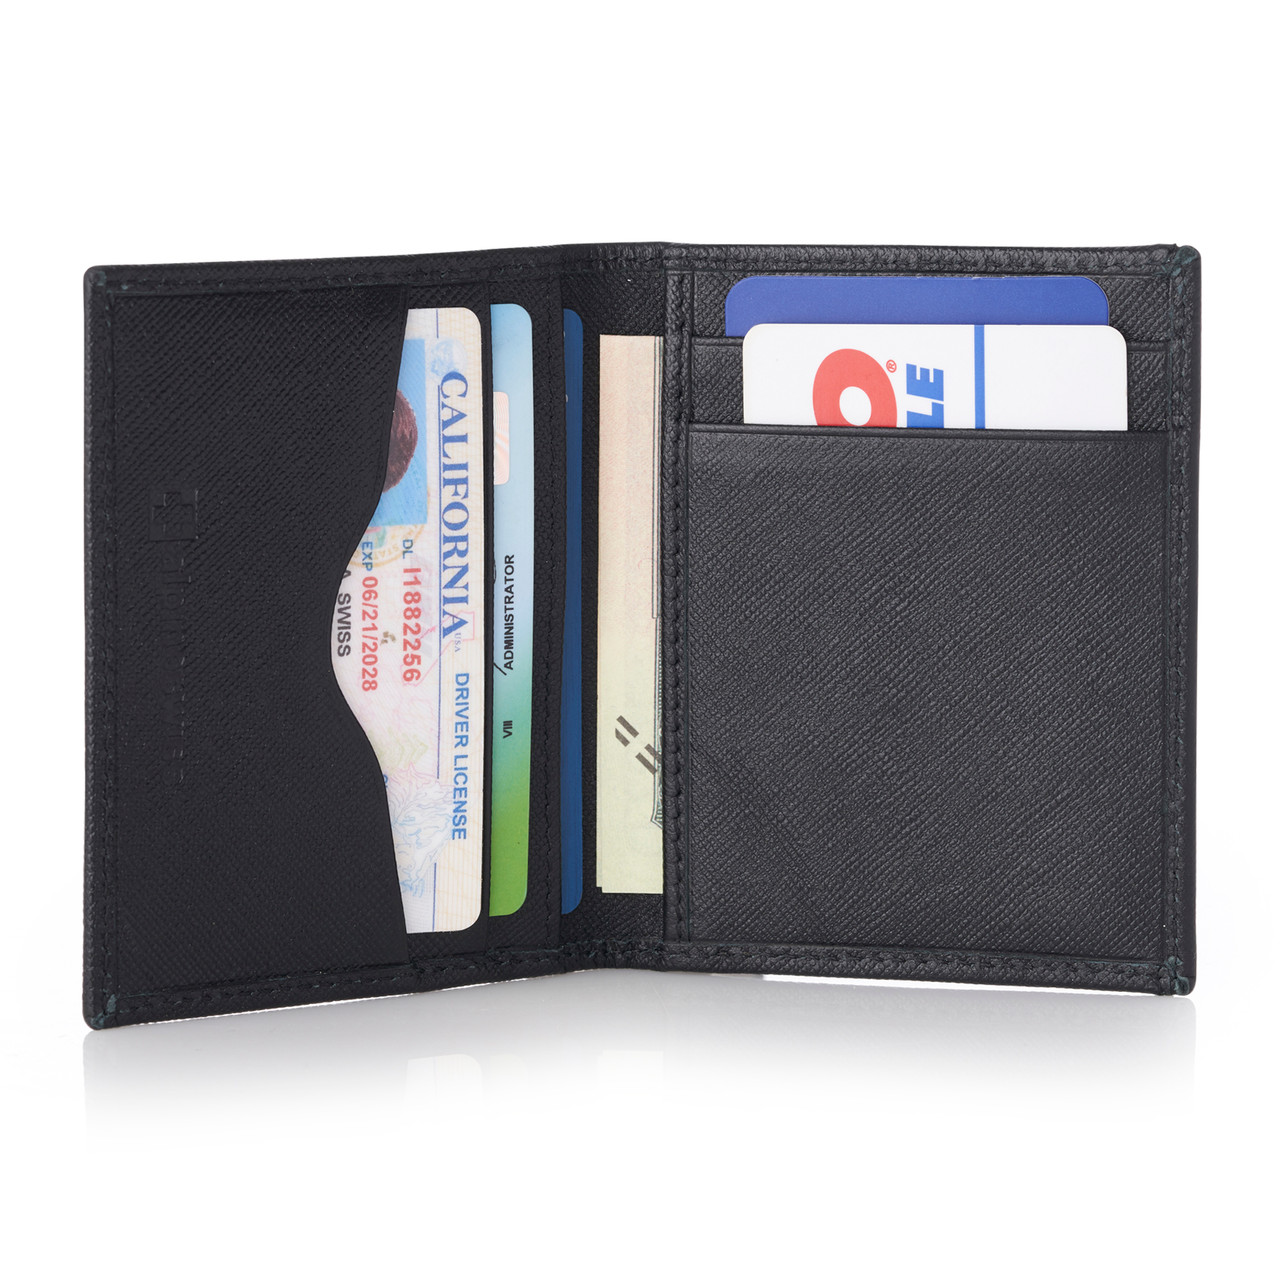  HoldingIT Leather Wallet Phone Case Compatible with